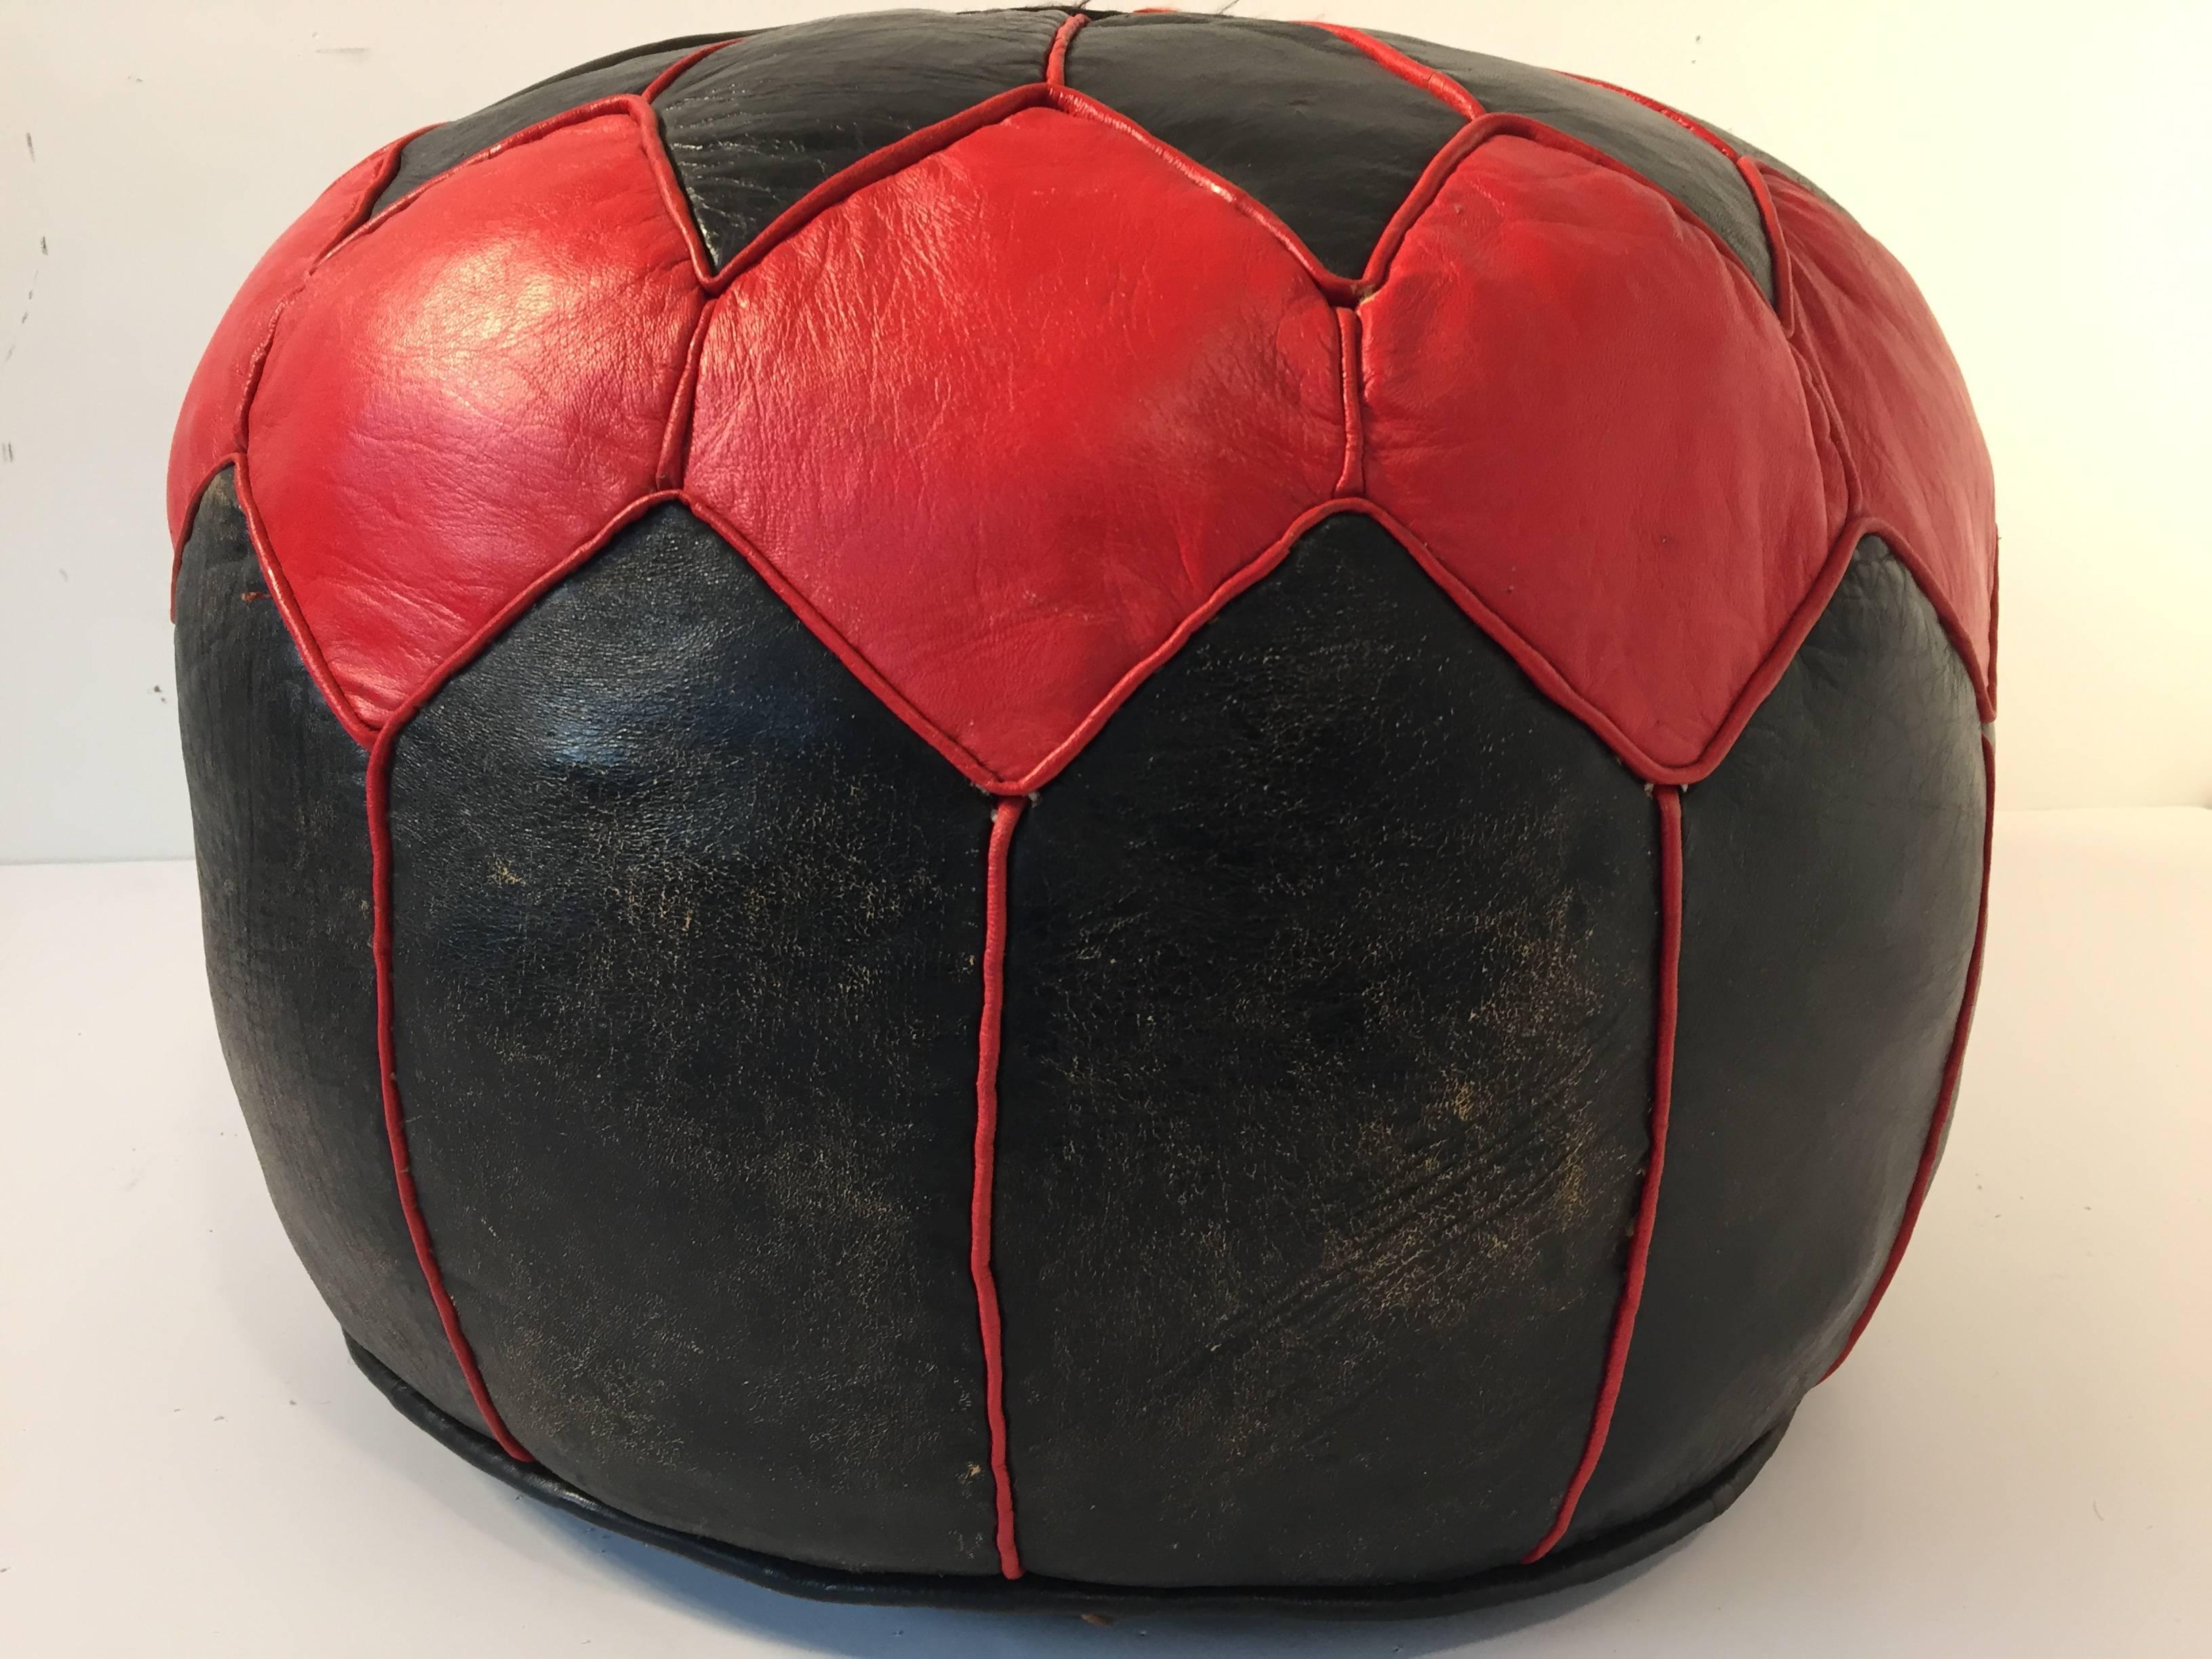 Moroccan Vintage Round Leather Pouf Red and Black (Volkskunst)